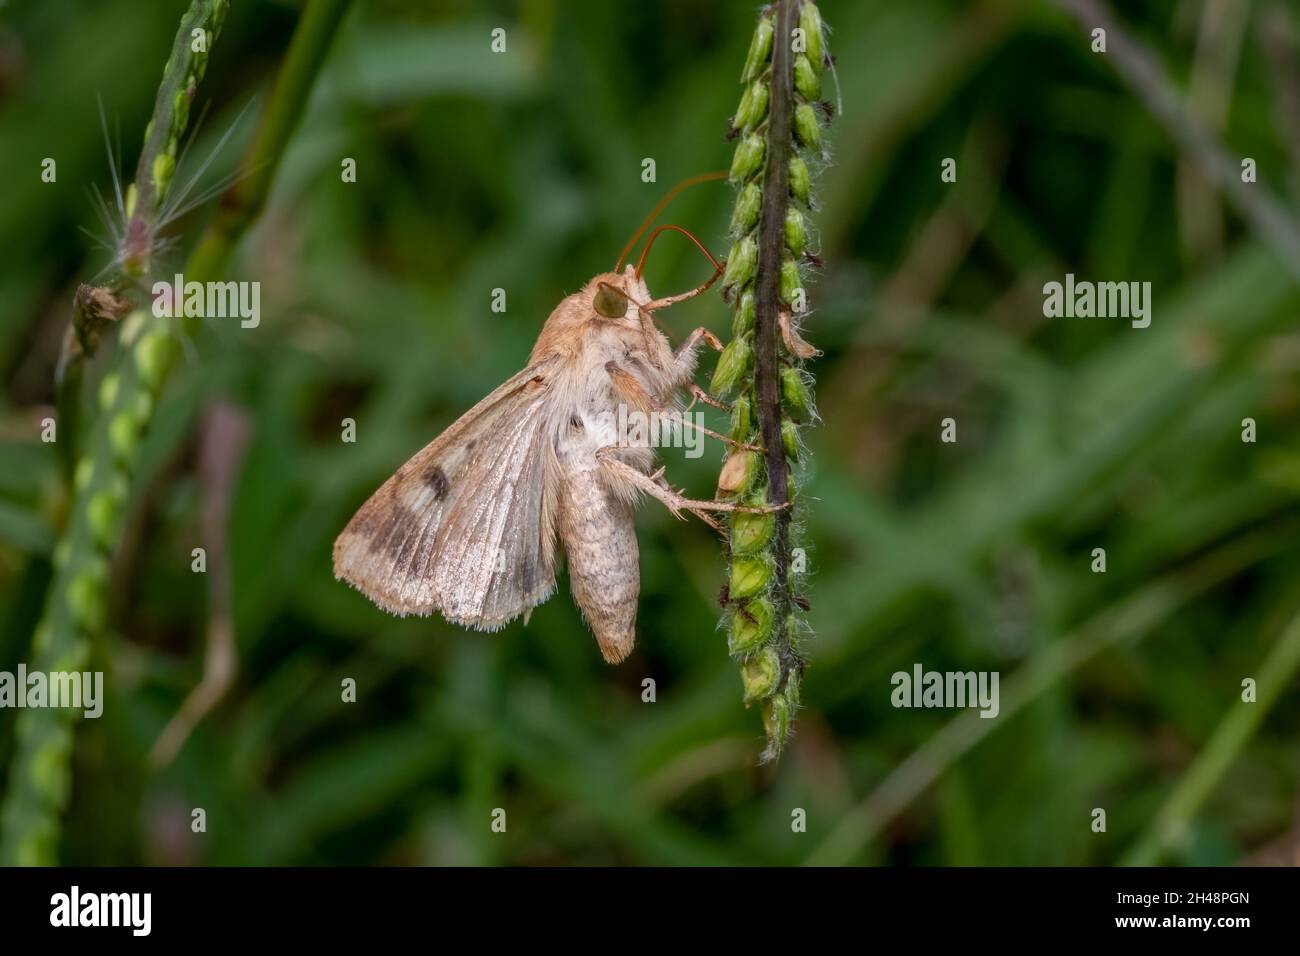 A Corn Earworm Moth (Helicoverpa zea) is looking for some nectar on the tiny blooms of a grass seed head. Raleigh, North Carolina. Stock Photo